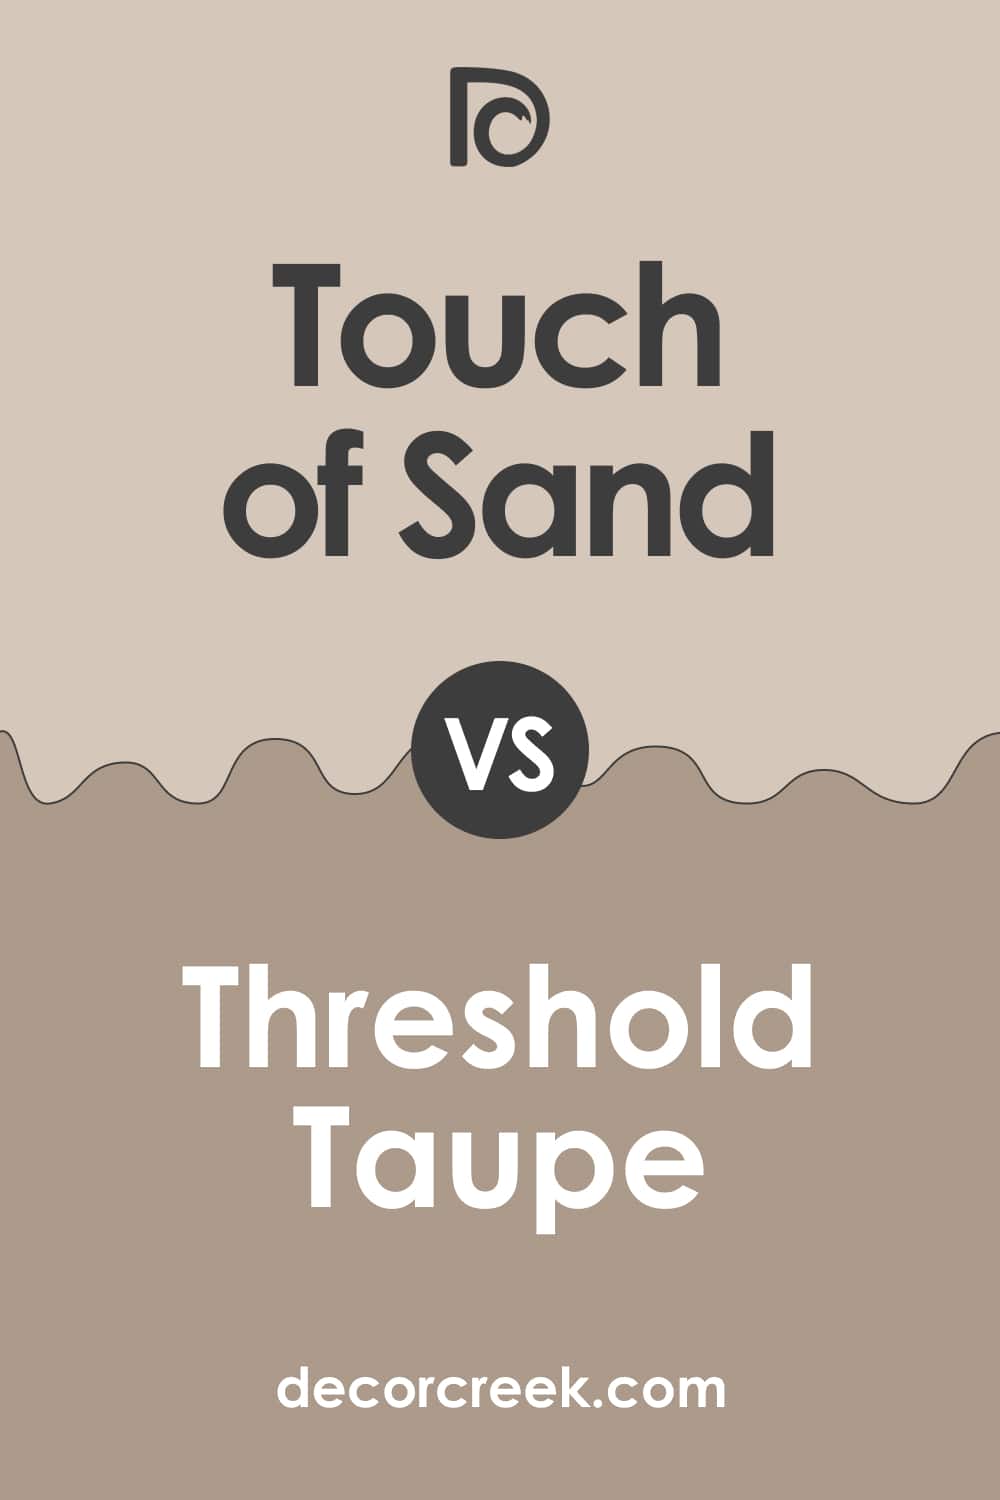 Touch of Sand vs Threshold Taupe